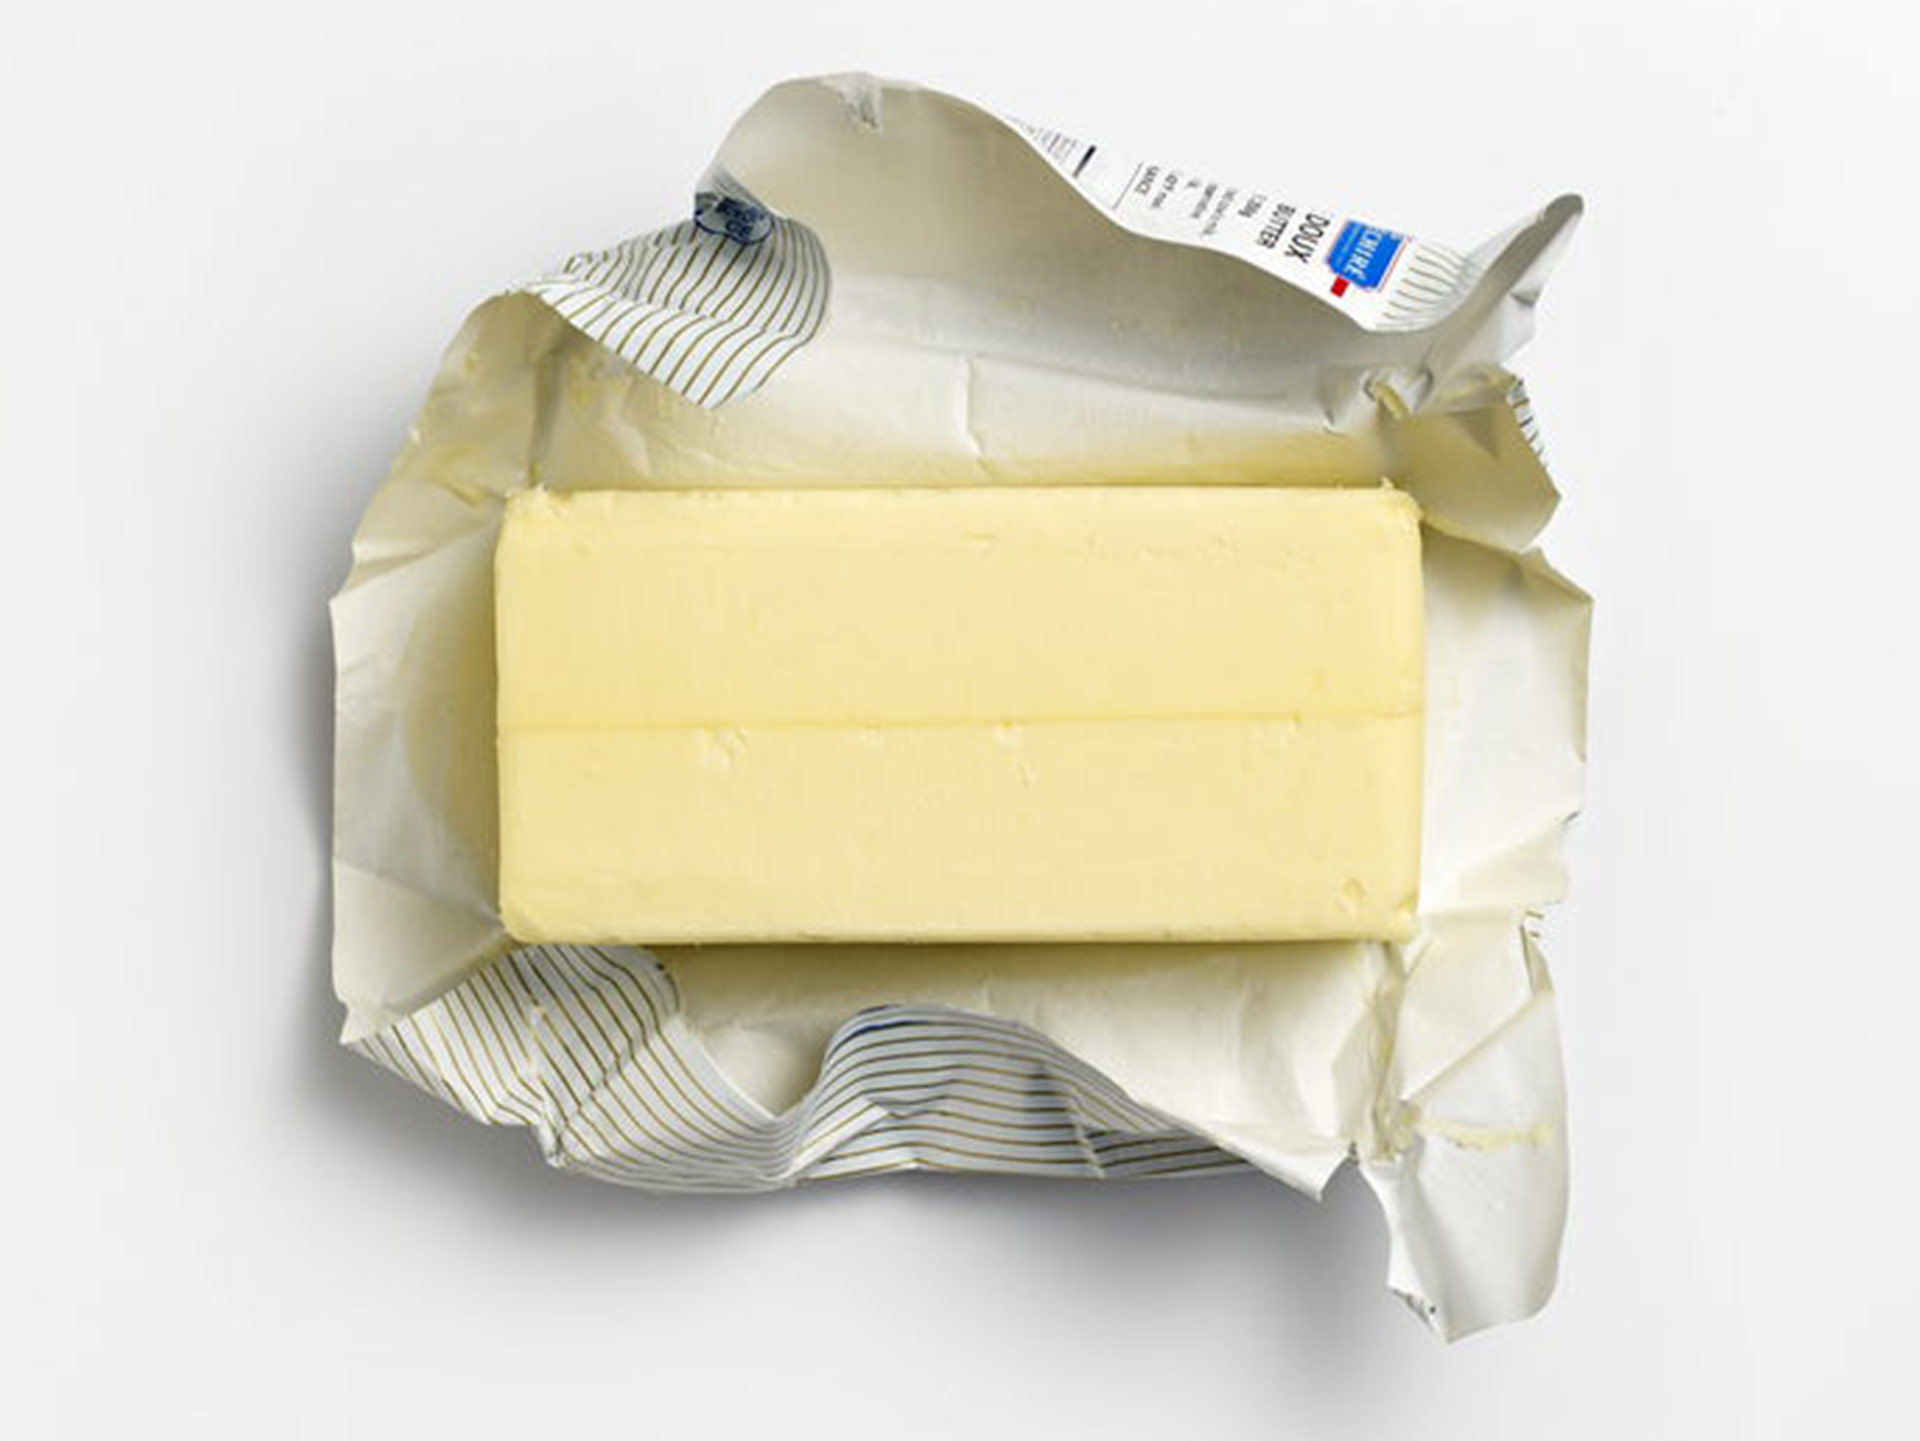 Our favorite new life hack is saving butter wrappers